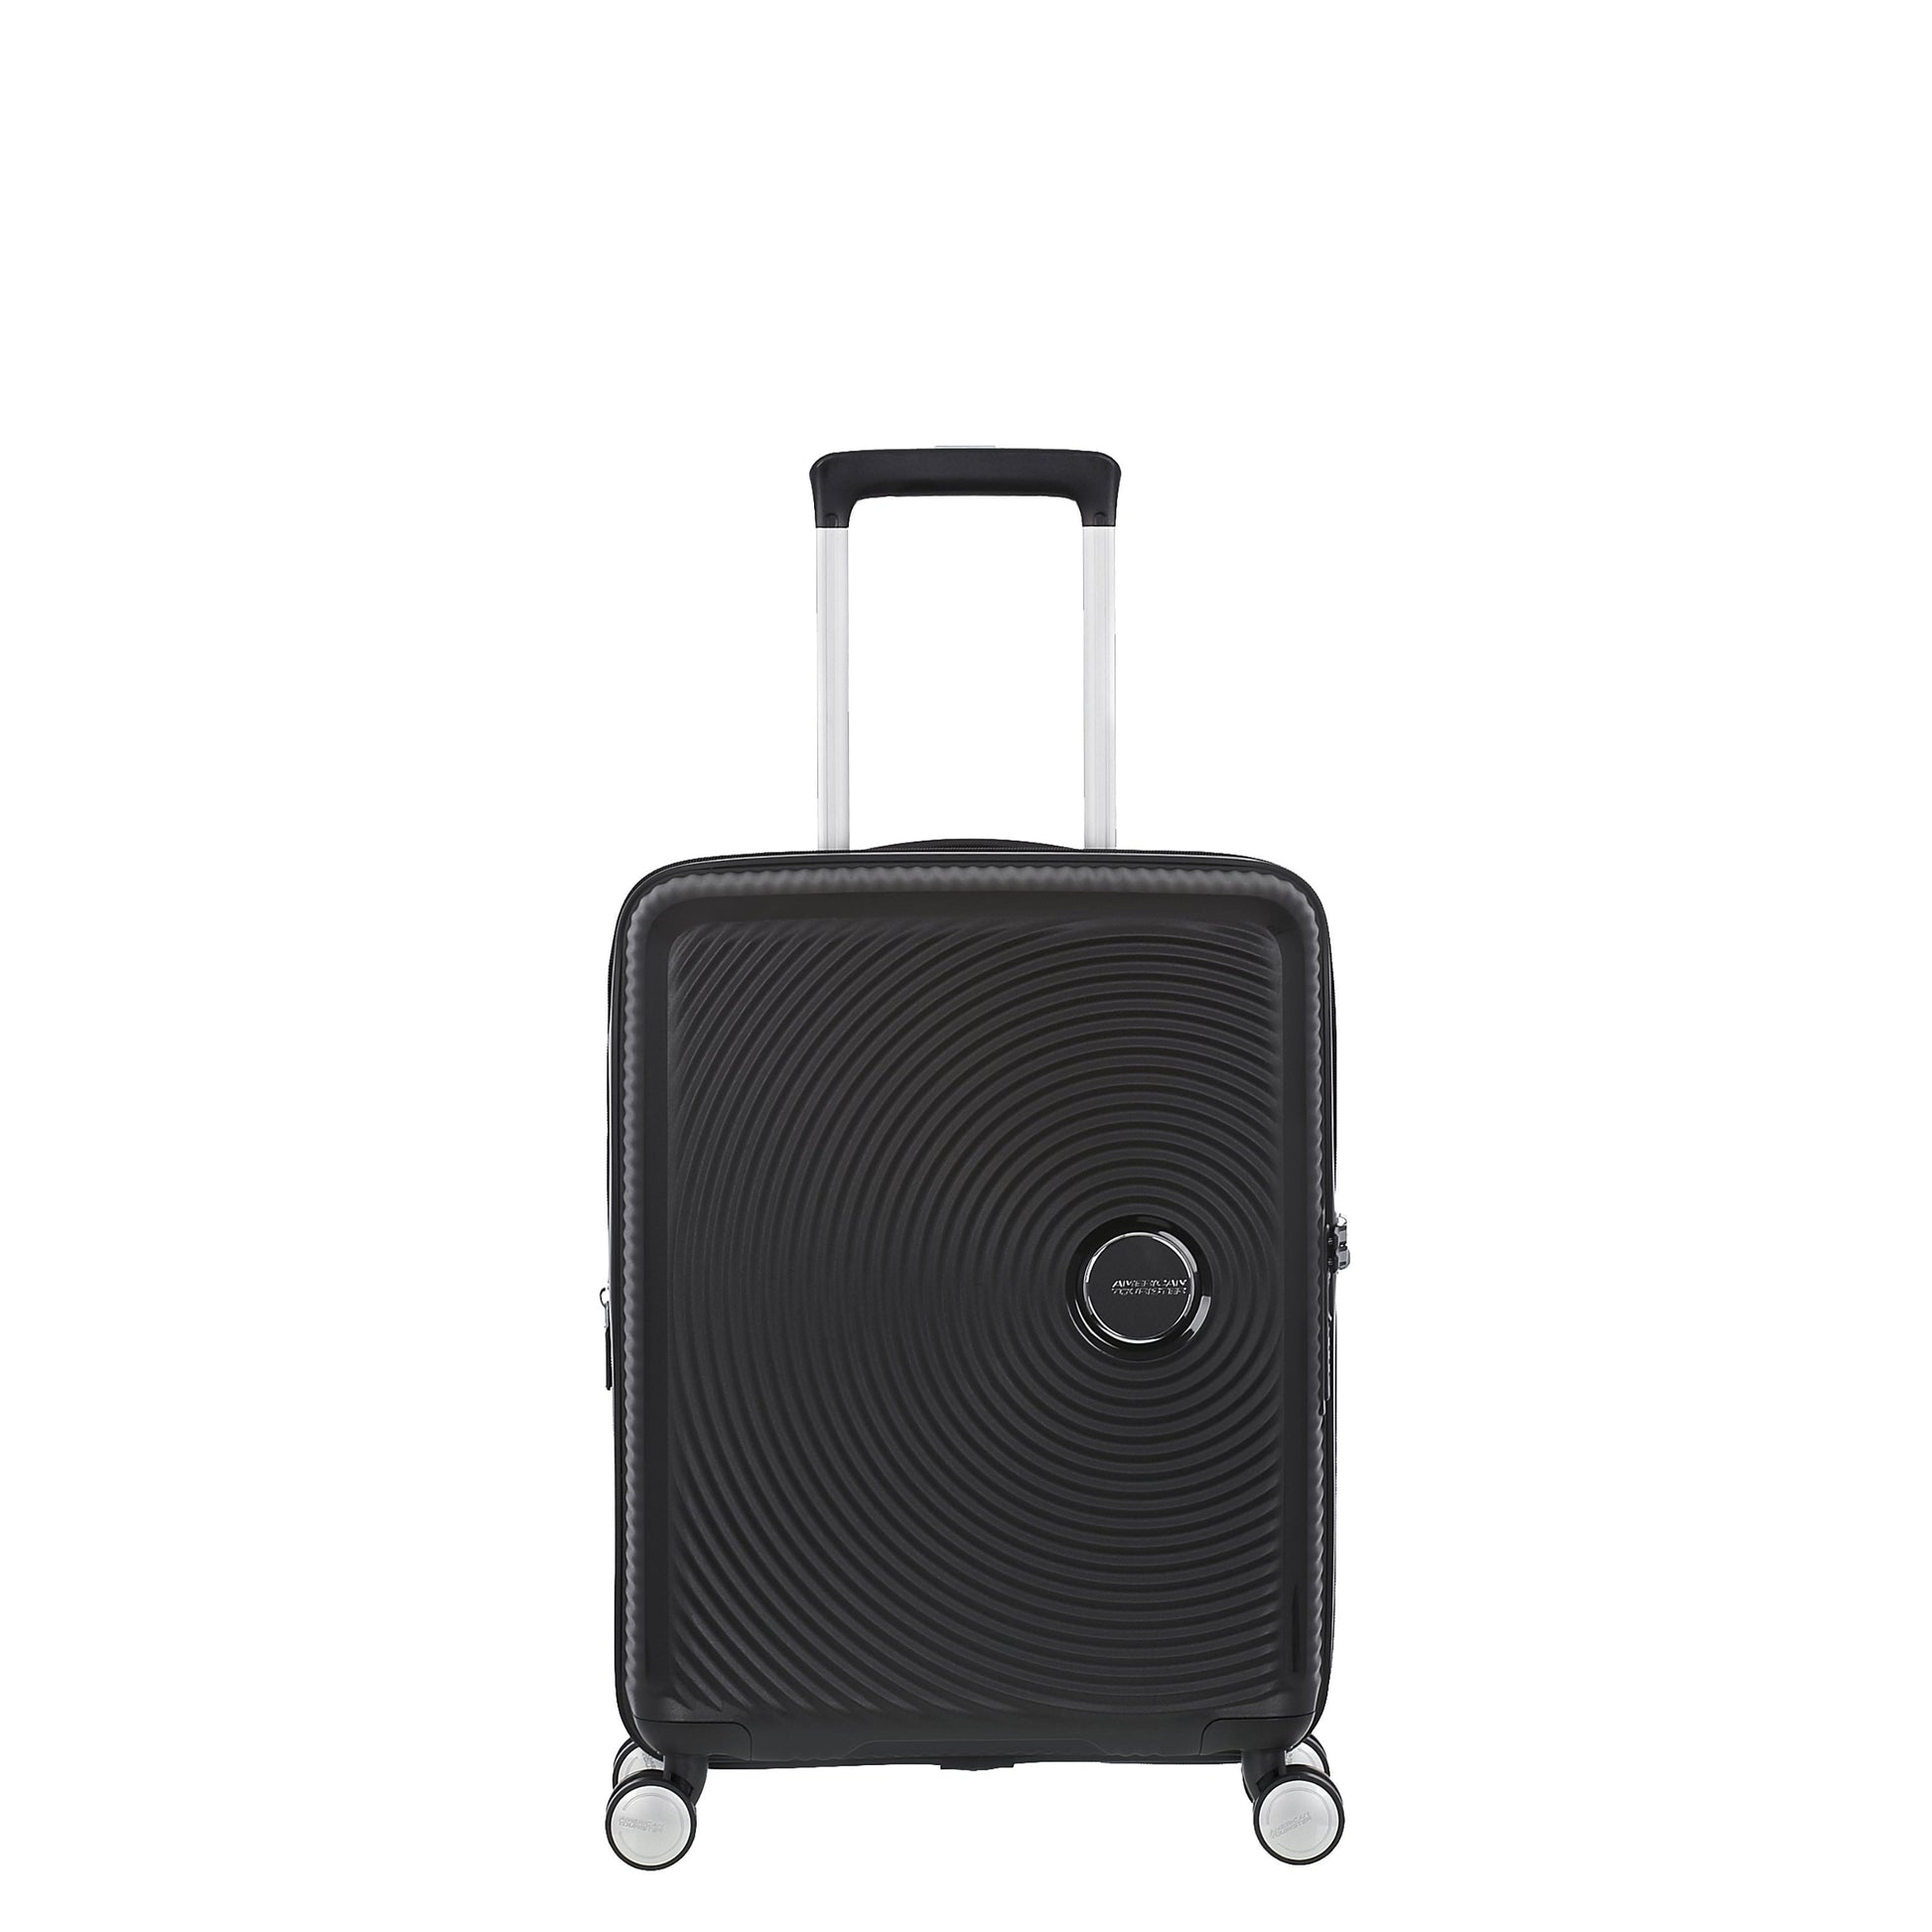 American Tourister Curio Spinner Carry-On Expandable Luggage - Bass Black